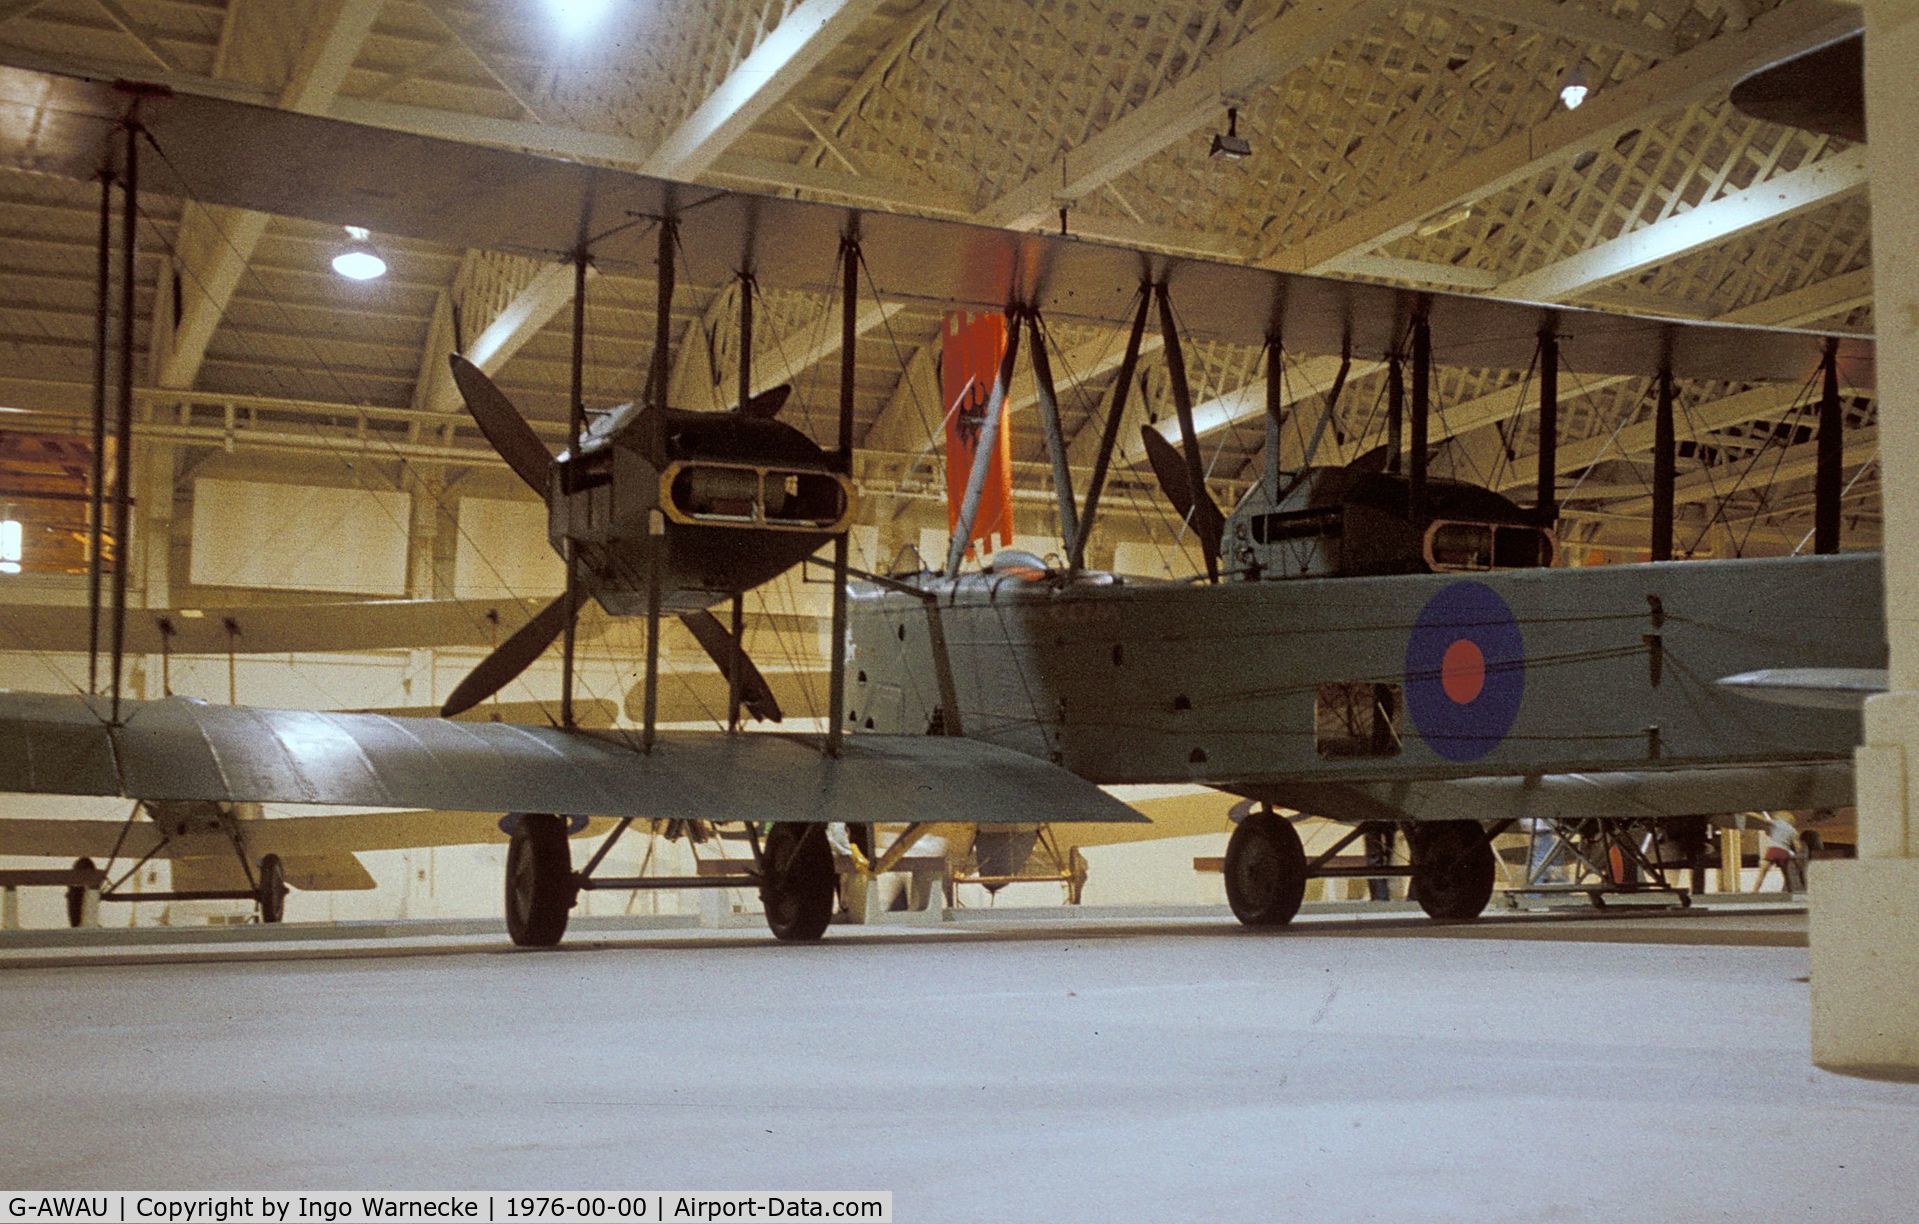 G-AWAU, Vickers FB-27A Vimy (replica) C/N VAFA02, Vickers Vimy replica at the Royal Air Force Museum, Hendon during the 'Wings of the Eagle' exhibition 1976